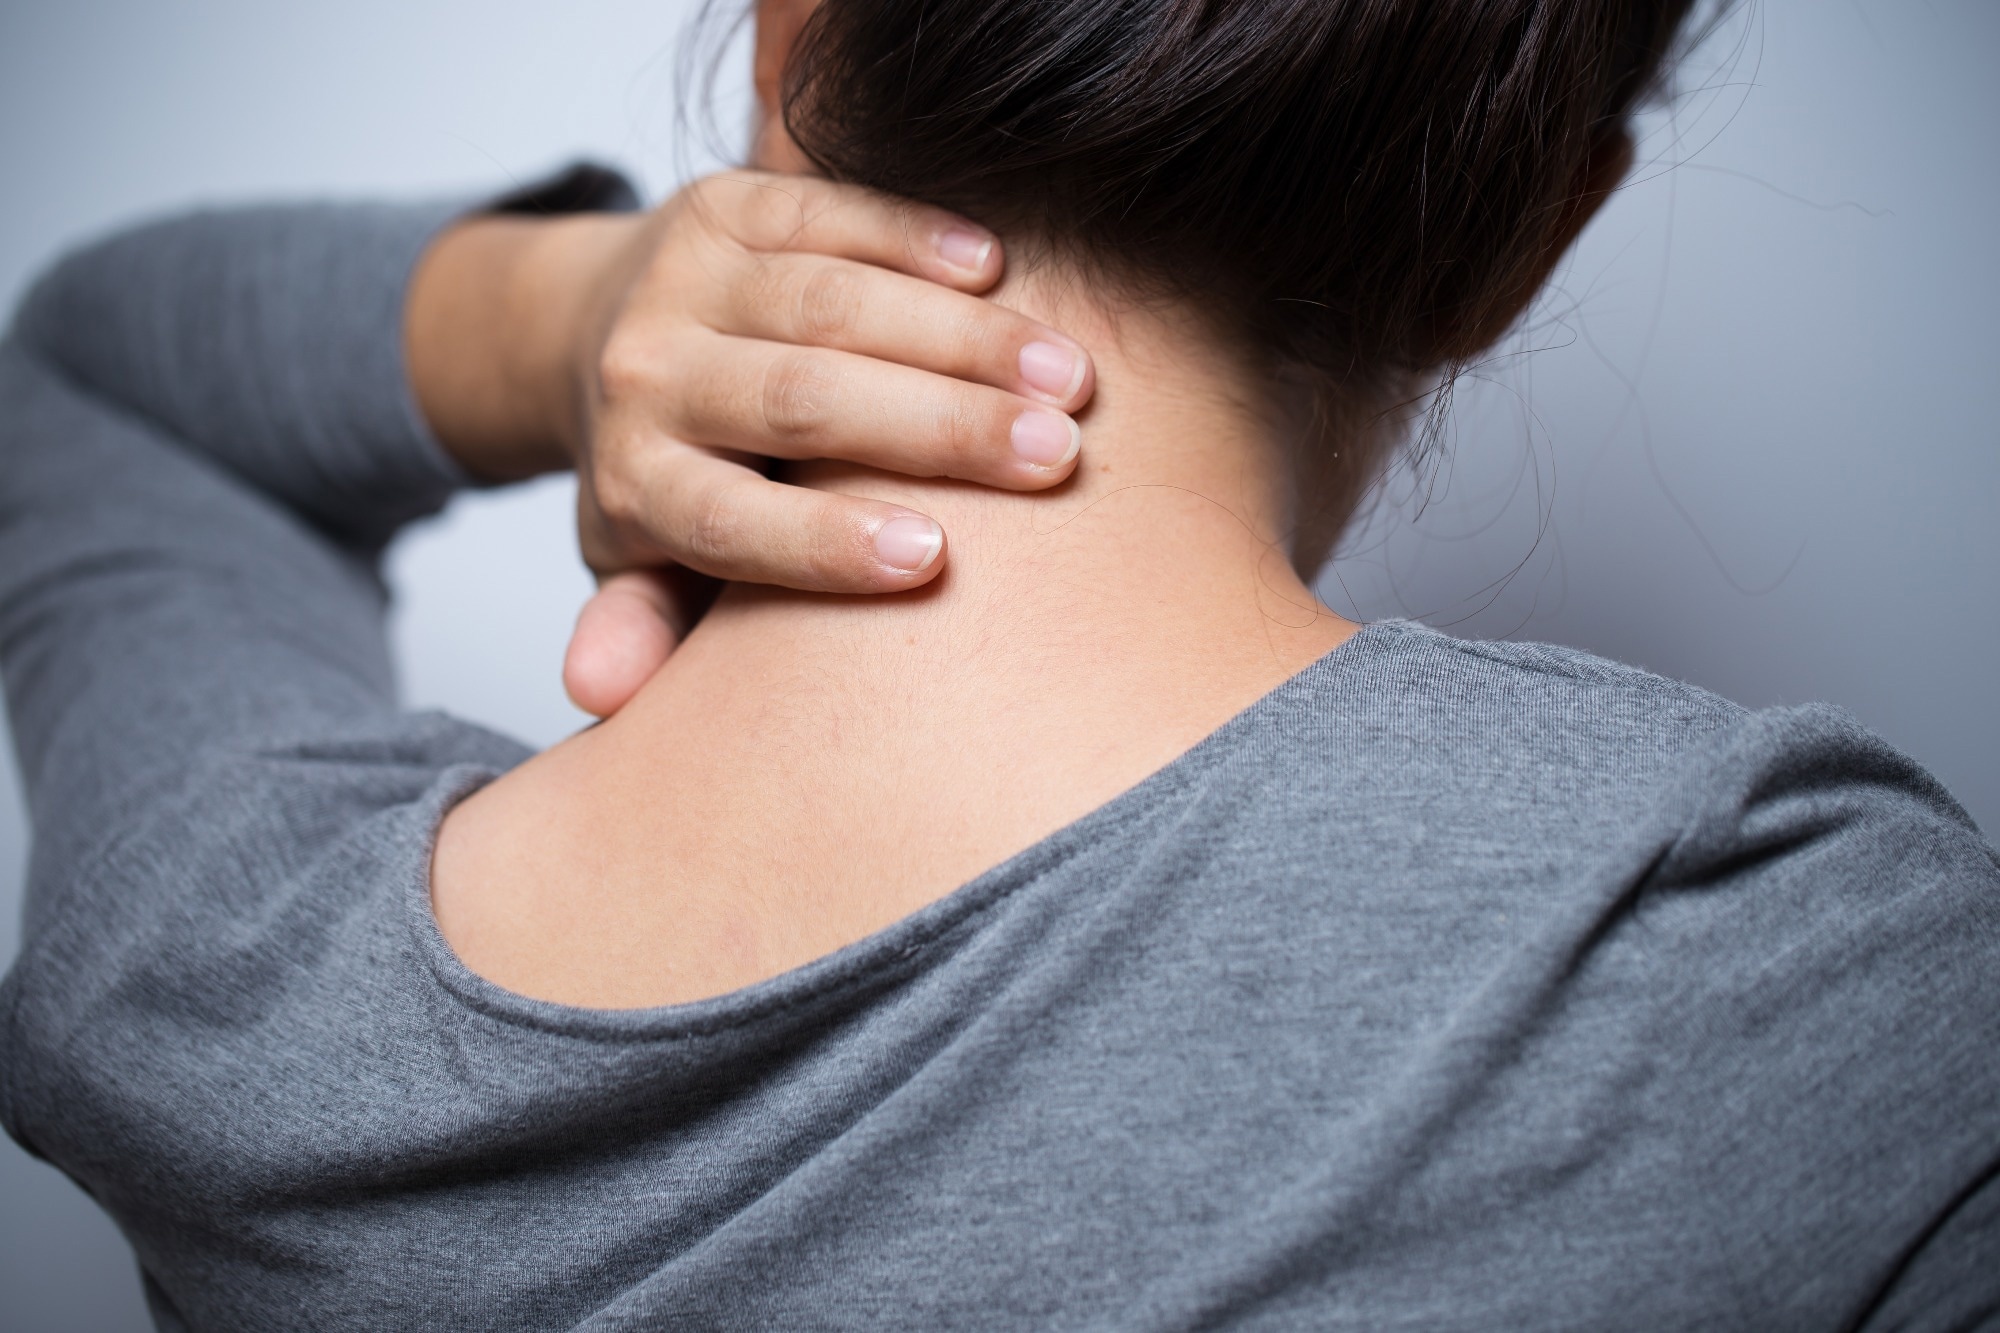 Study: Multicenter, Randomized, Placebo-Controlled Crossover Trial Evaluating Topical Lidocaine for Mechanical Cervical Pain